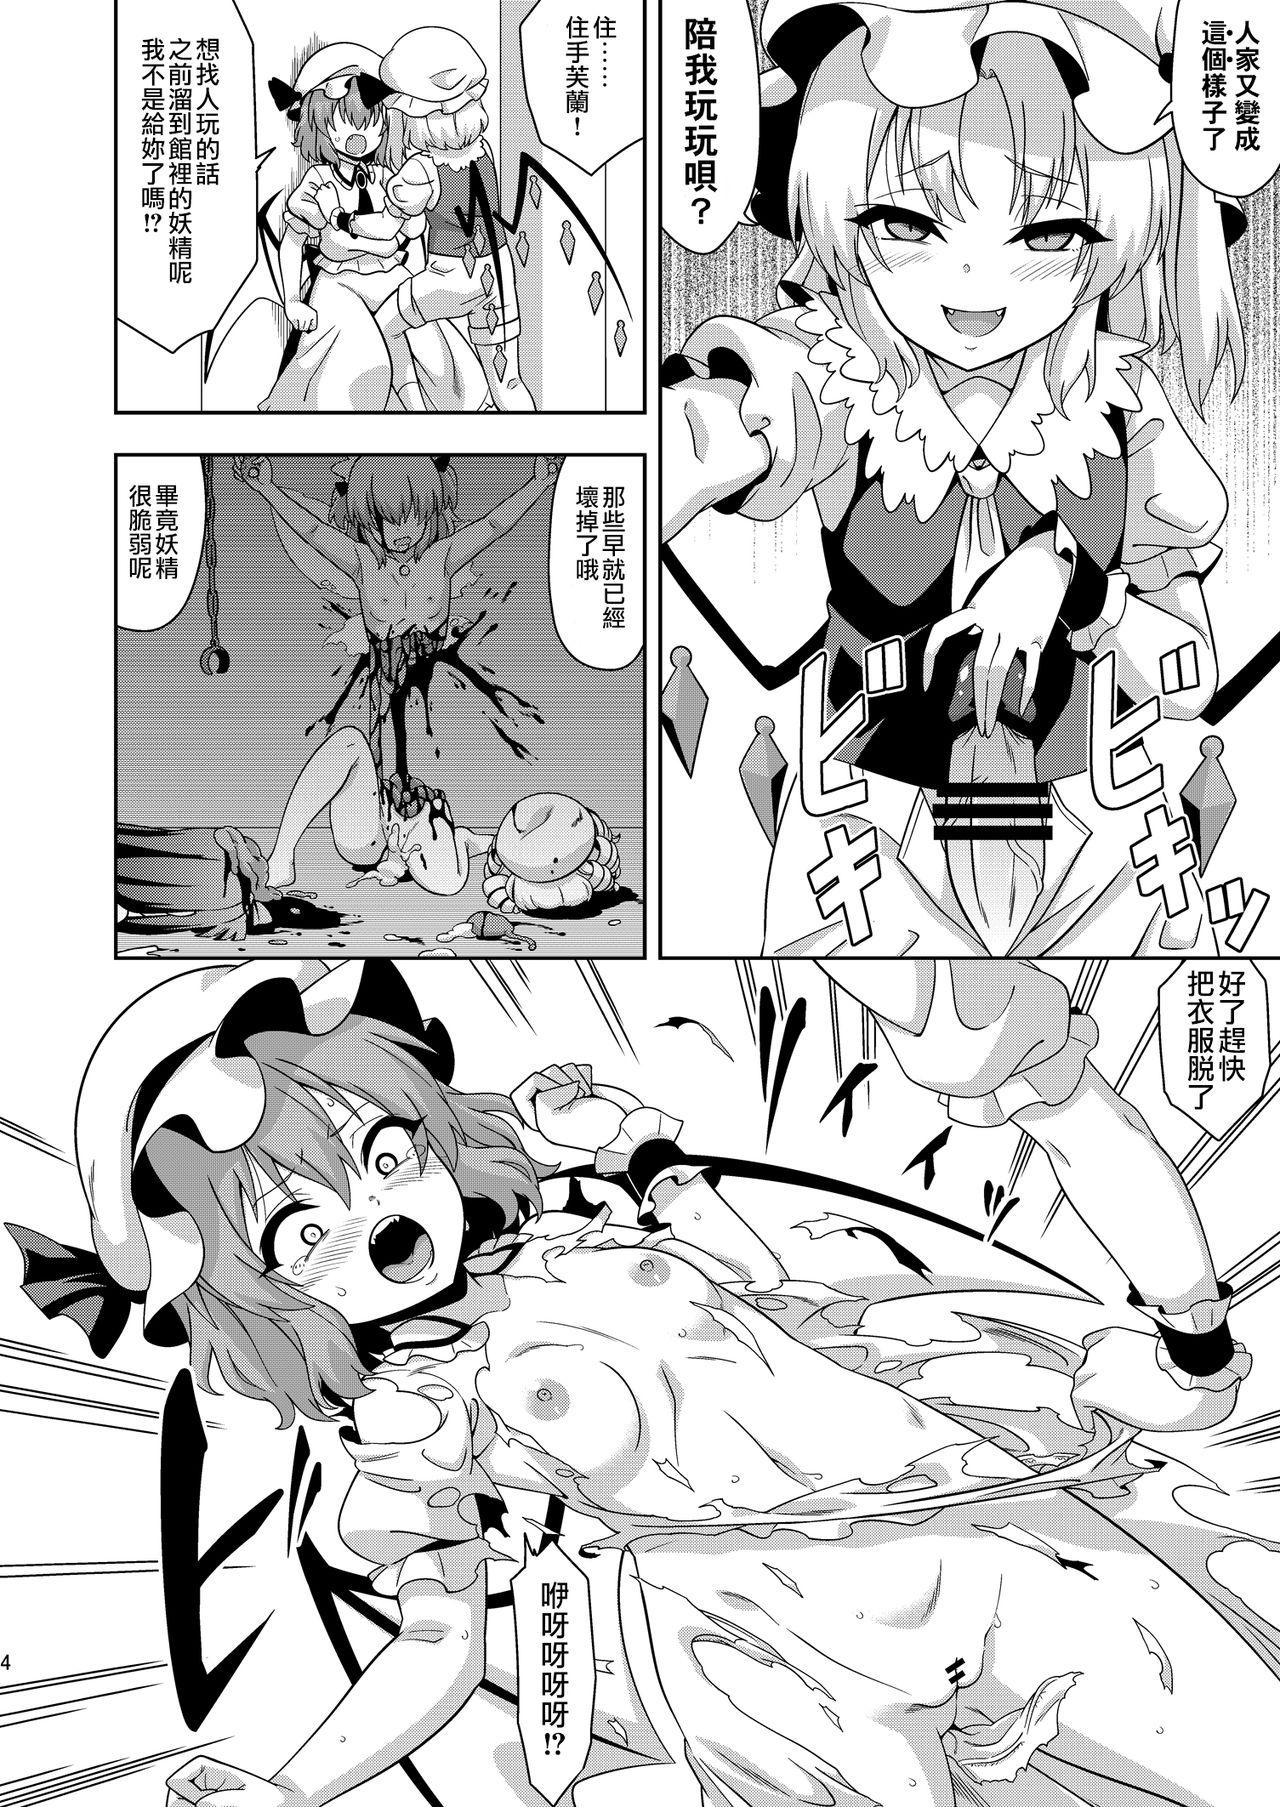 Smooth VAMPIRE SACRIFICE | 吸血鬼的活祭 - Touhou project Blowjob - Page 5